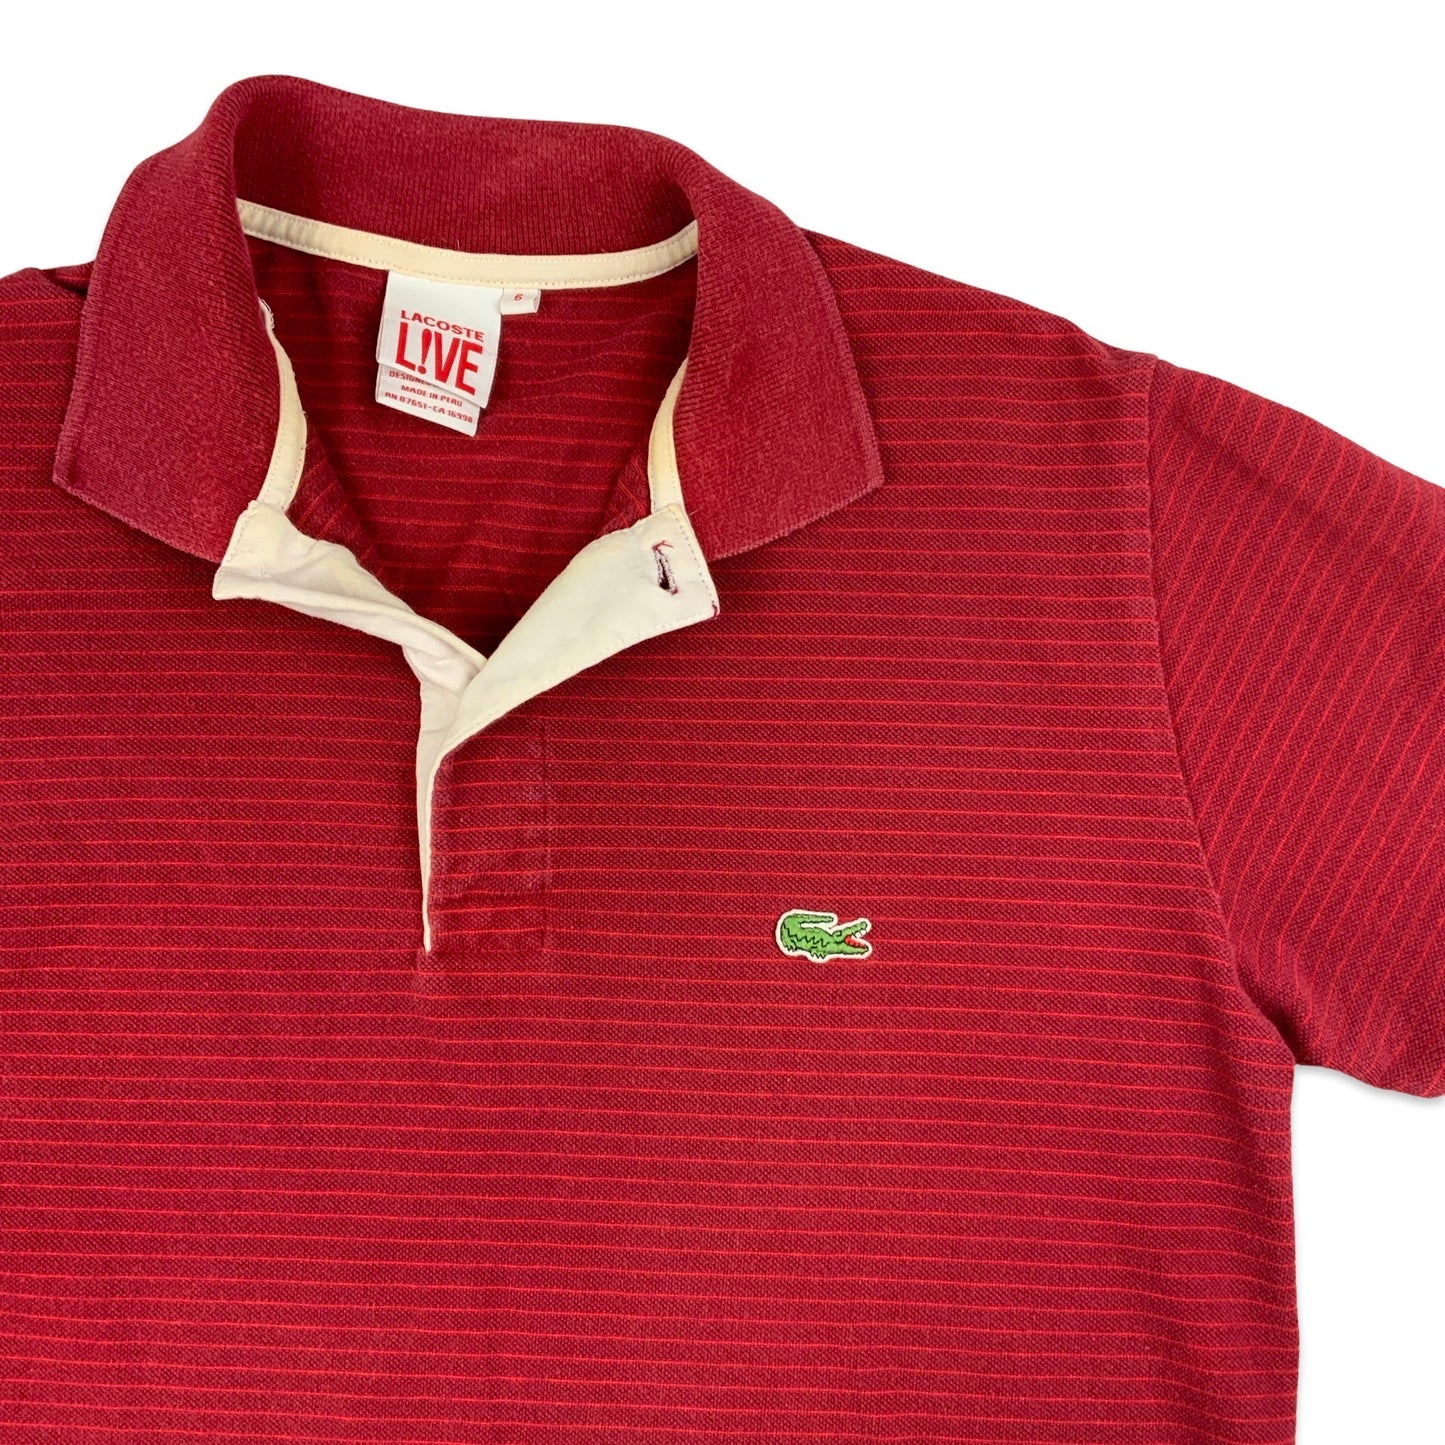 Lacoste Red Striped Polo Shirt M L